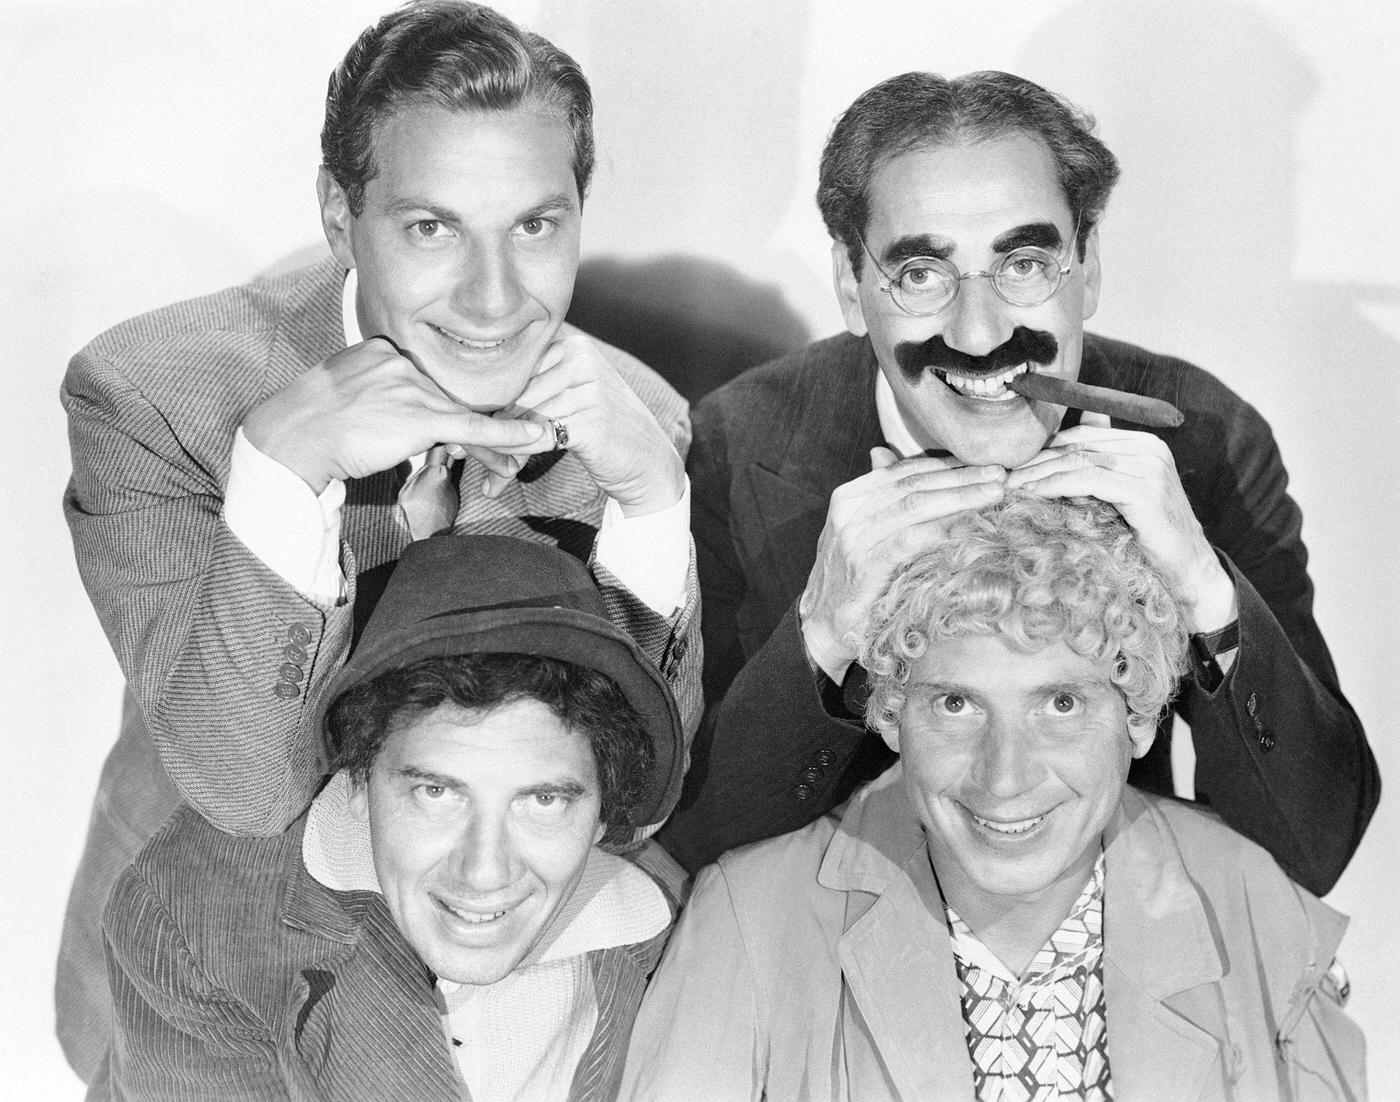 The Marx Brothers in character for Duck Soup (1933): Zeppo as Lt. Bob Roland, Groucho as Rufus T. Firefly, Harpo as Pinky, and Chico as Chicolini.